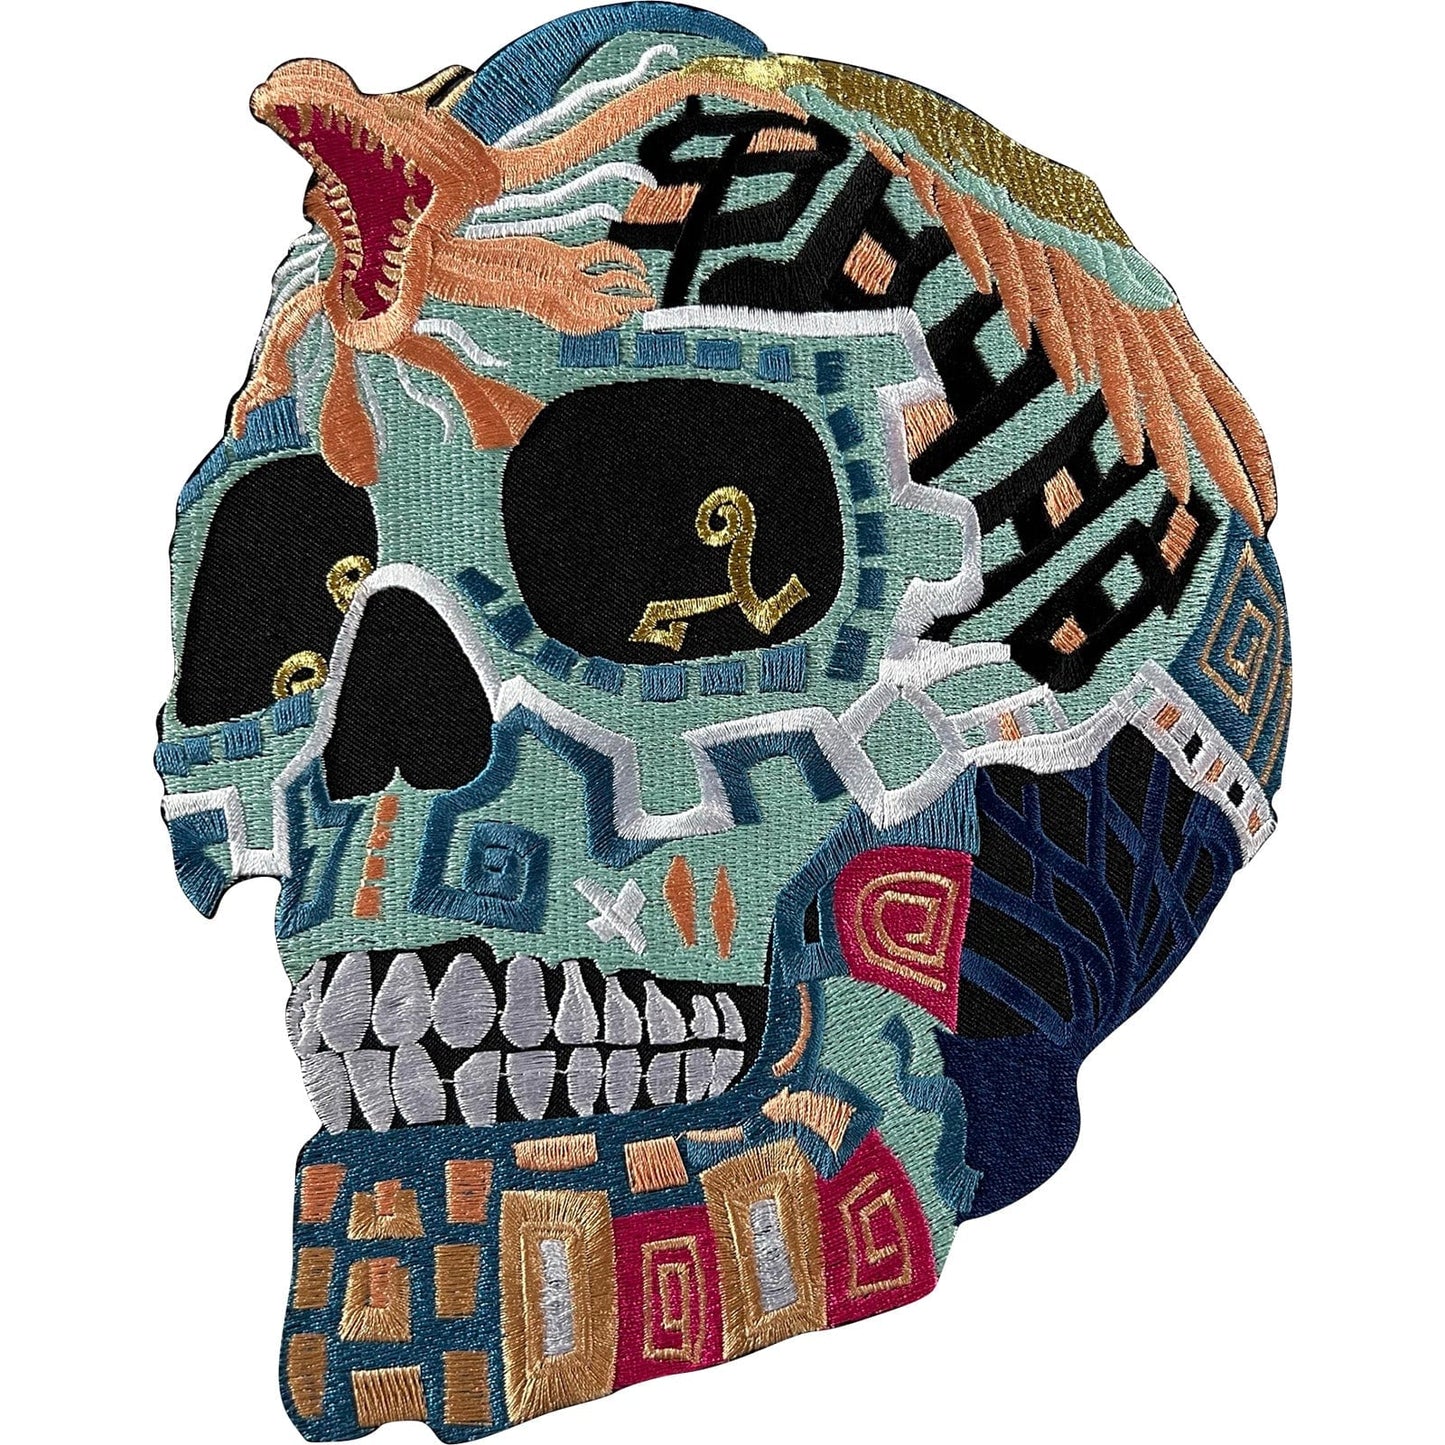 Large Inca Skull Patch Iron On Sew On Big Embroidery Crafts Applique Badge Motif